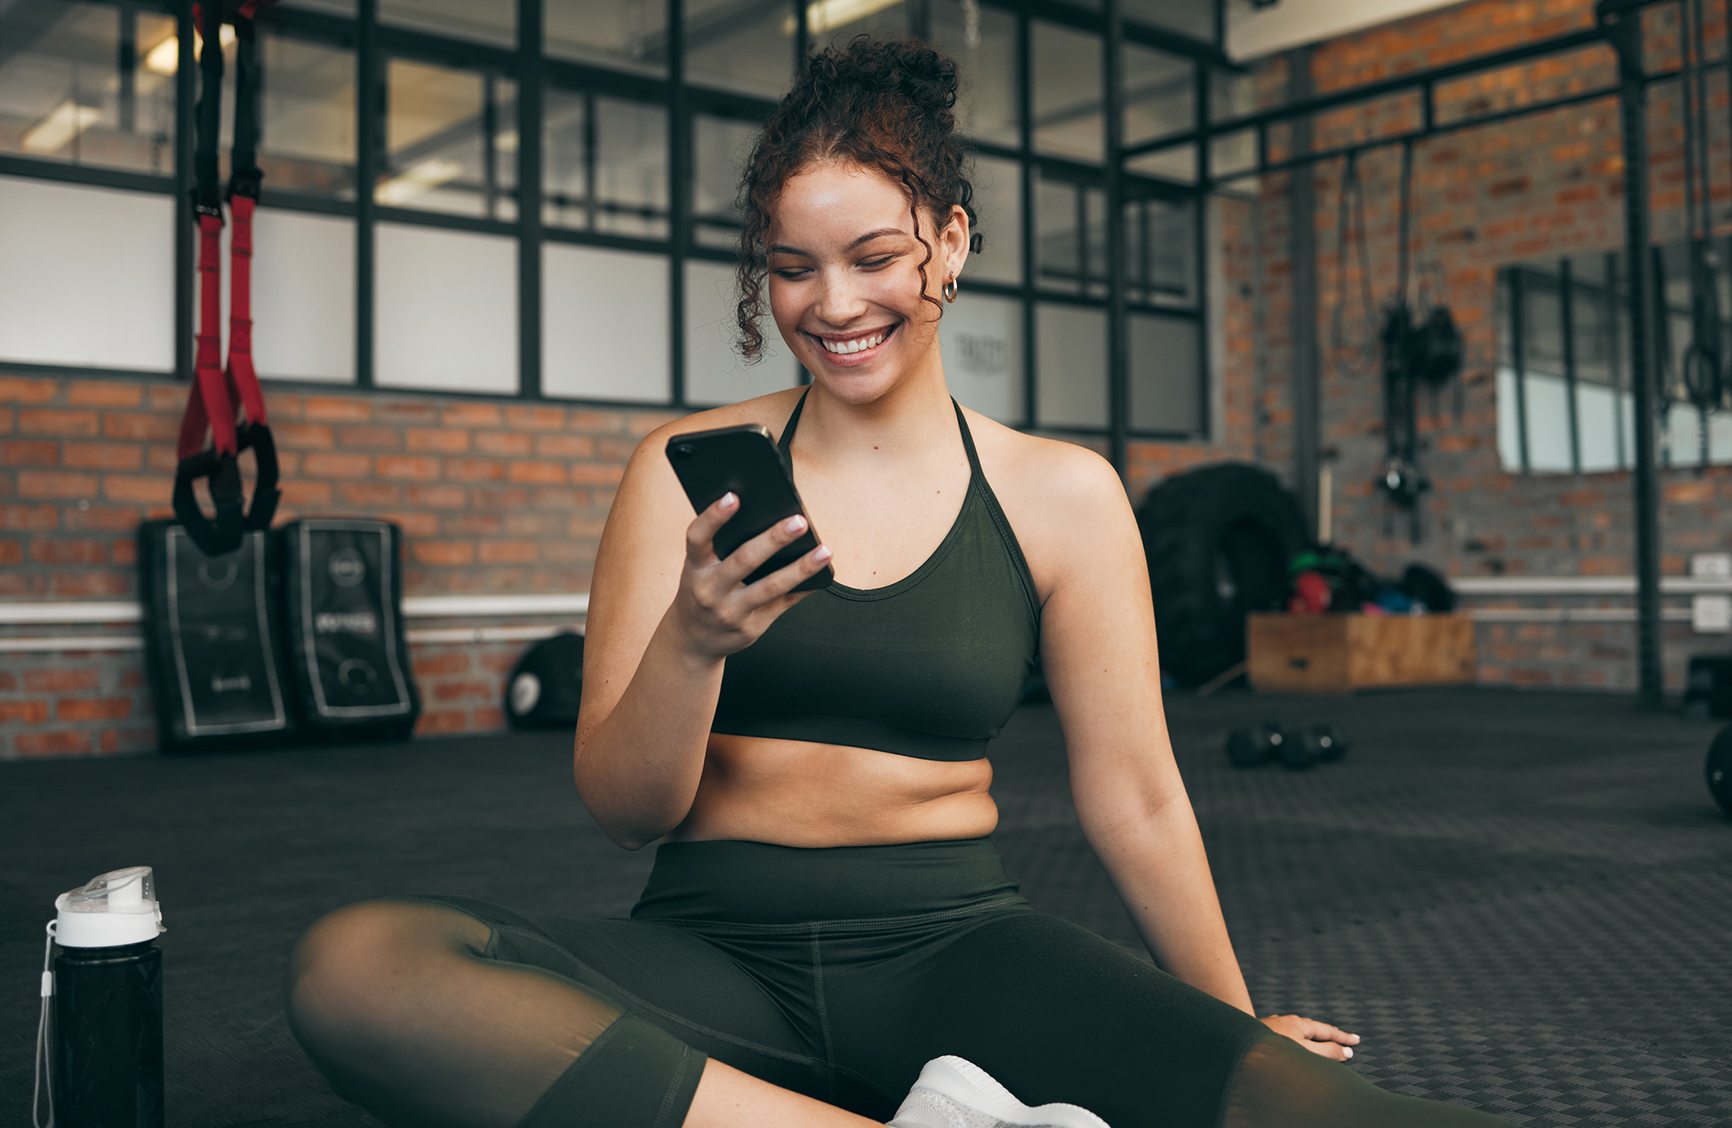 Happy woman, fitness and phone at gym for a workout, training and body wellness with a mobile app. Sports female with smartphone for progress, performance and communication for a healthy lifestyle